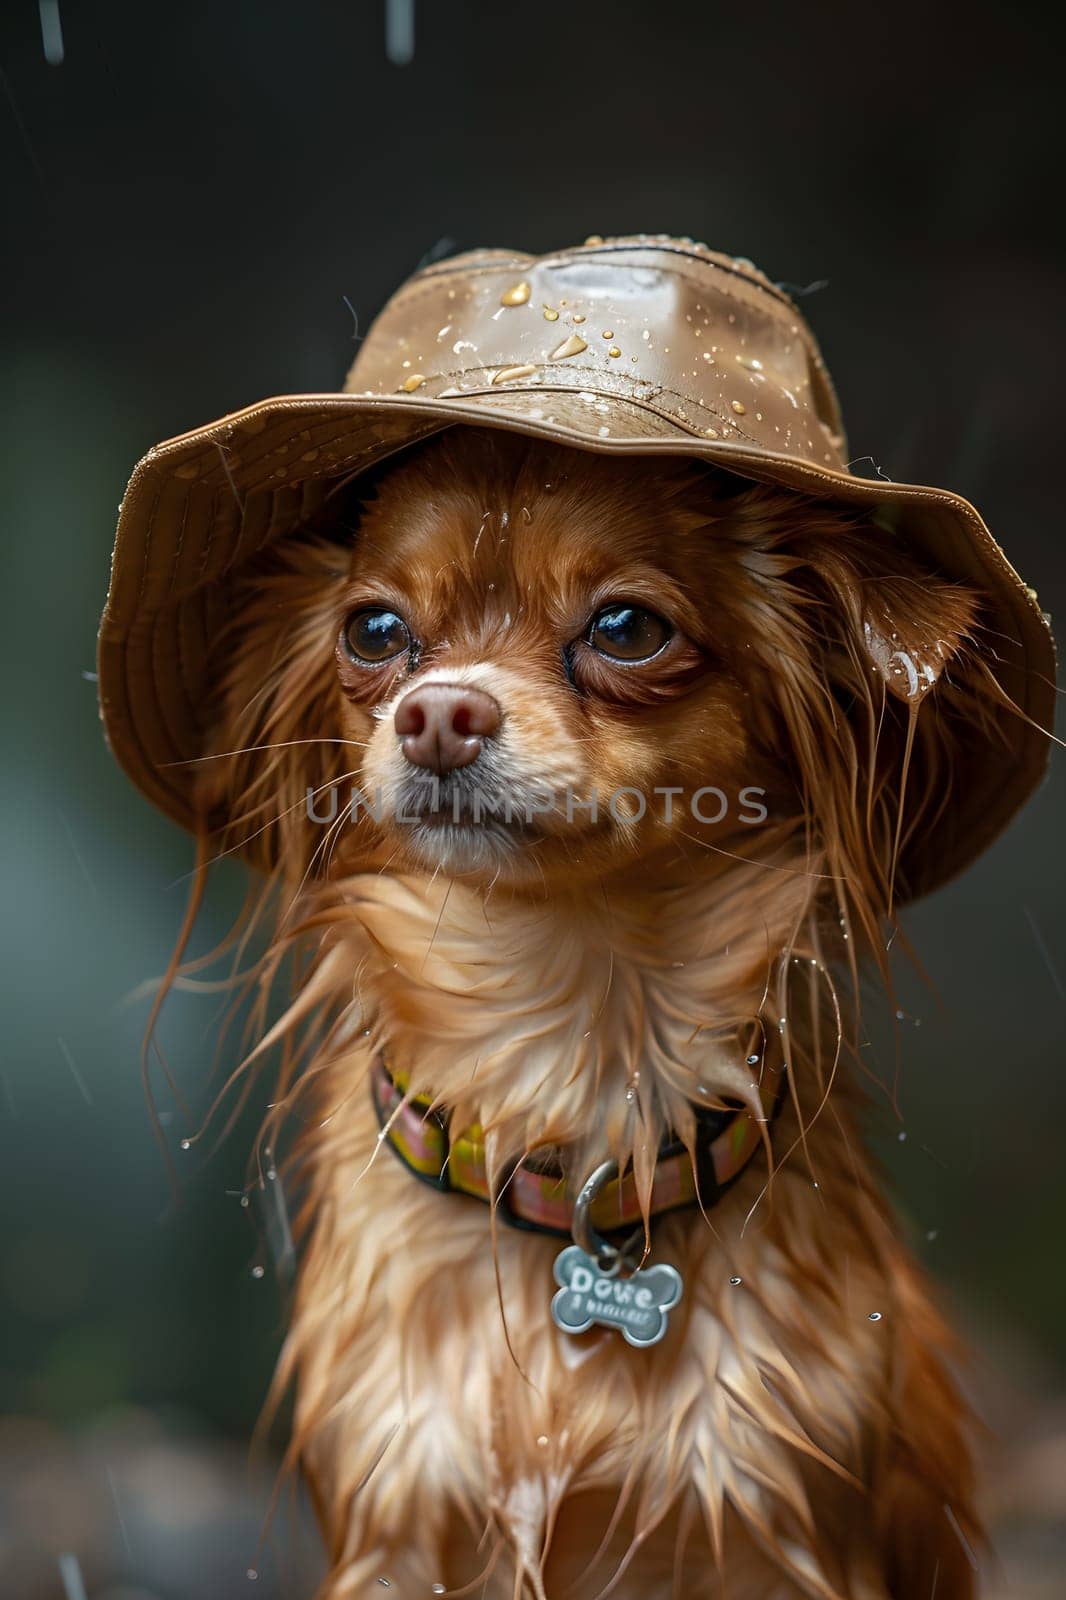 Companion dog with hat and collar, brown fur, wagging tail, and happy smile by Nadtochiy